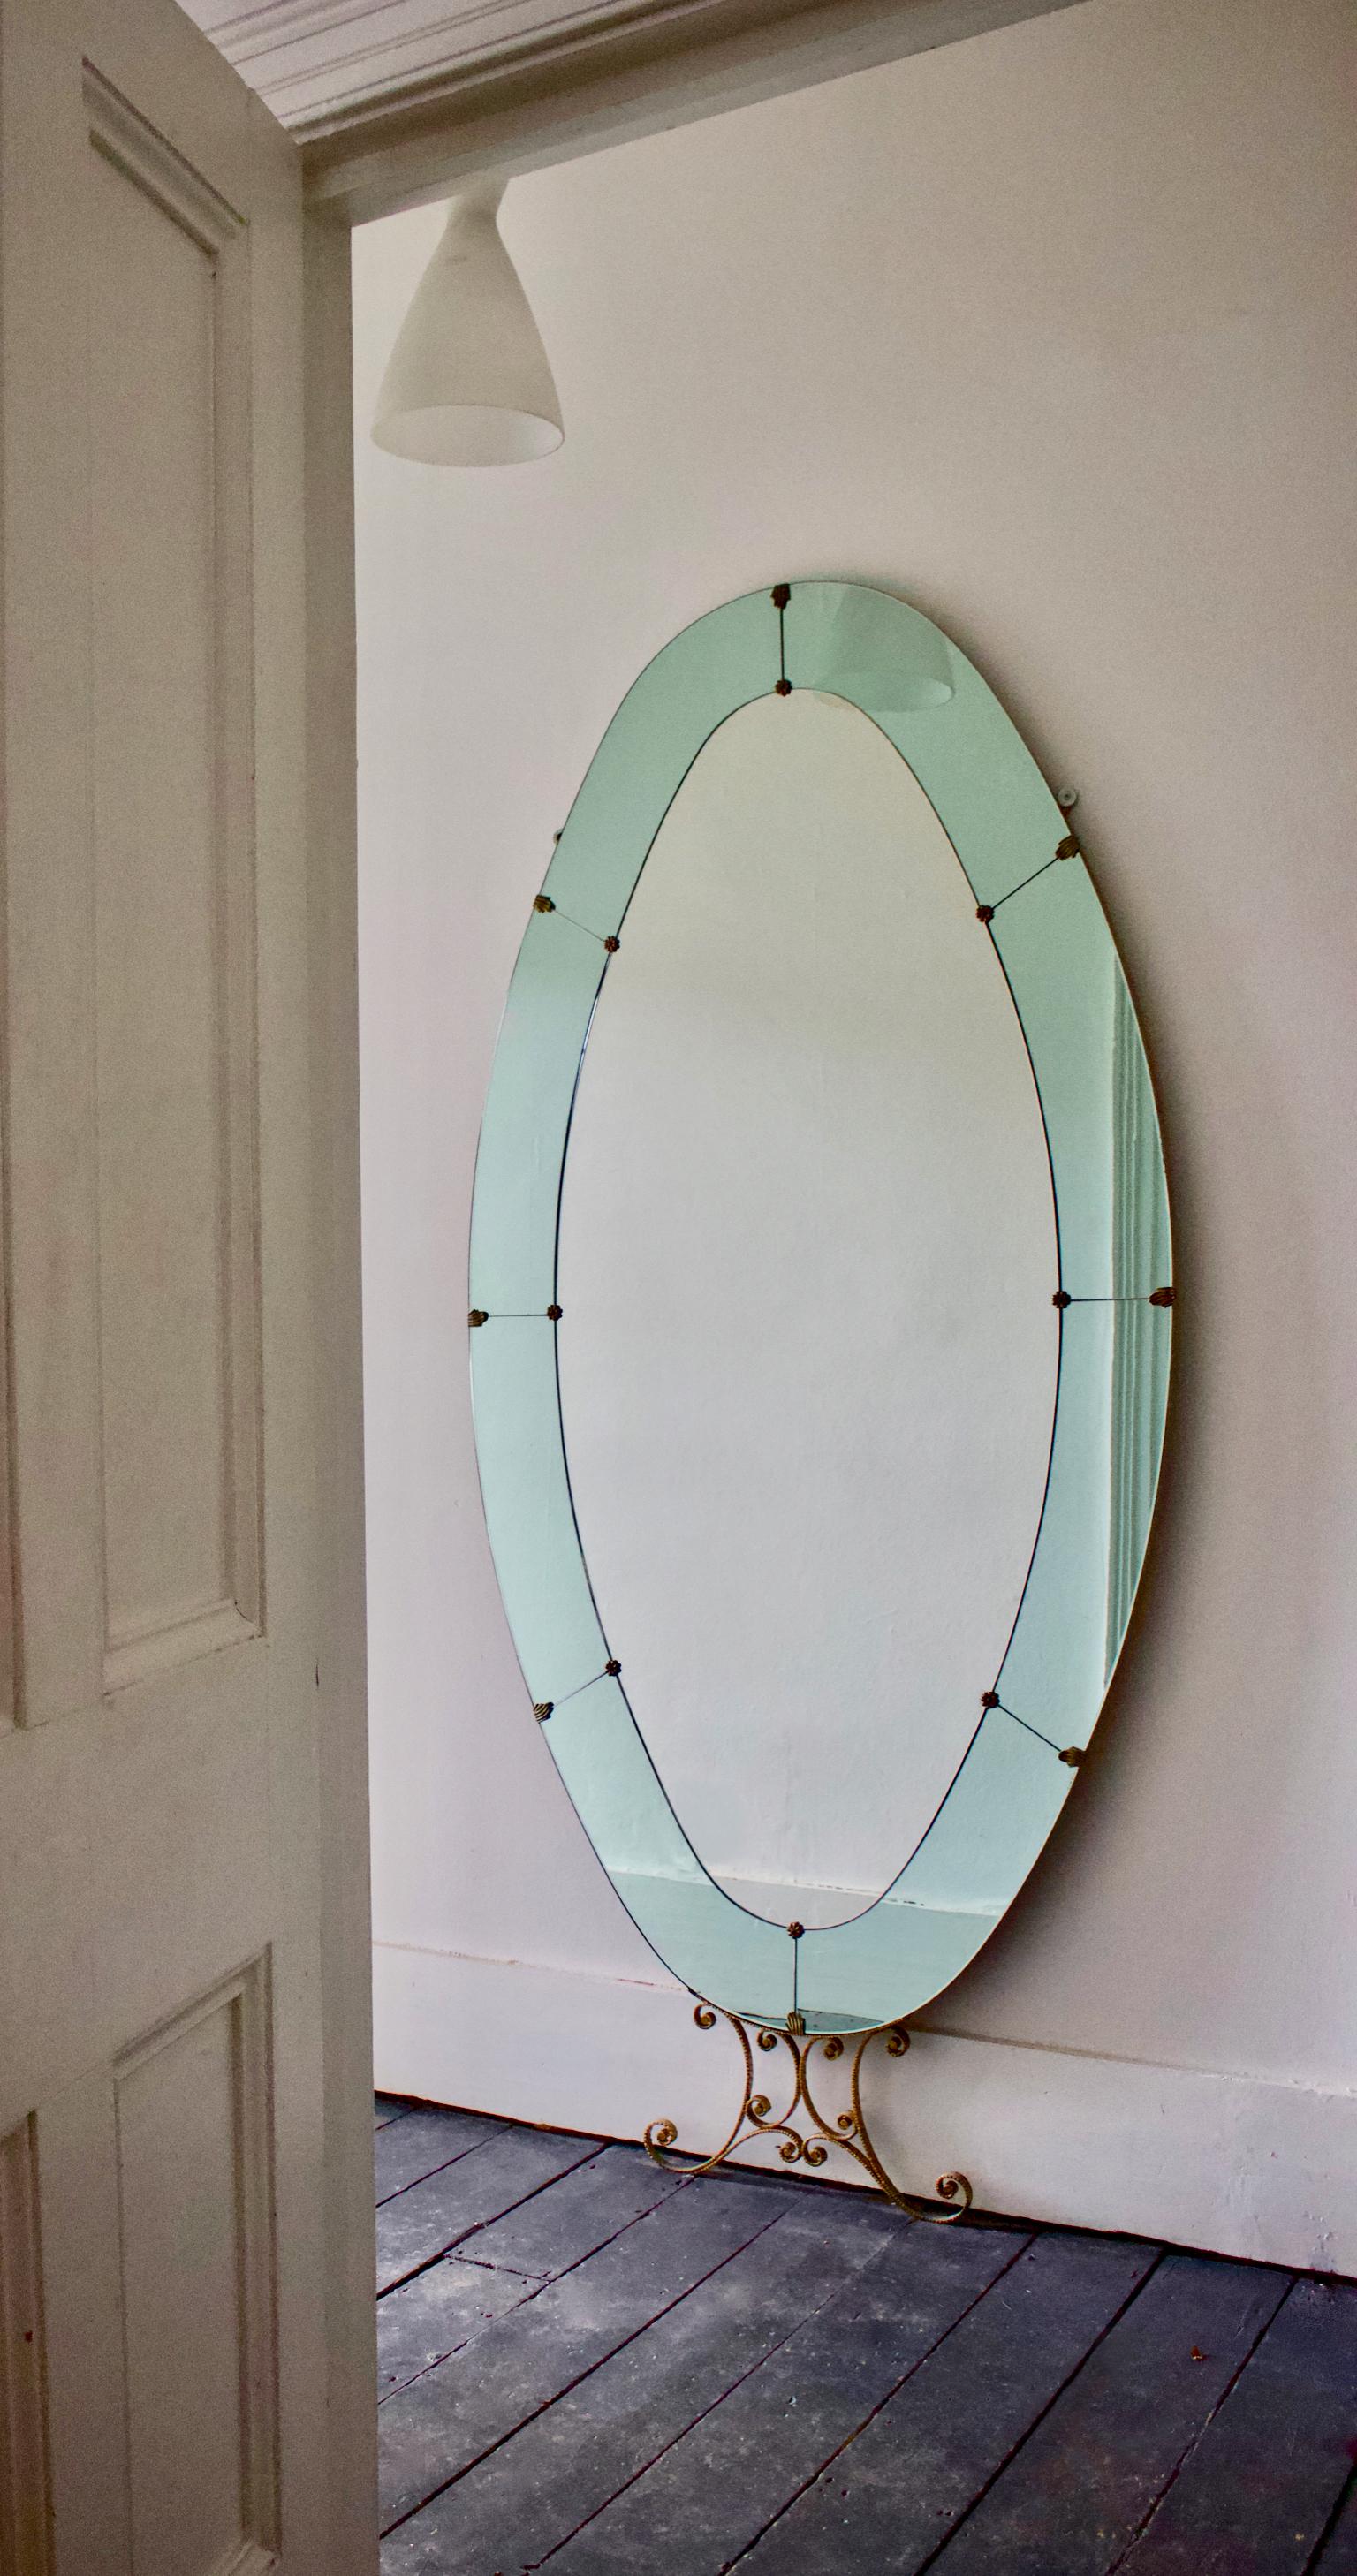 Mid-20th century Italian floor-standing oval mirror with blue border and decorative metal stand, attributed to Pier Luigi Colli. 

The clear central mirror is surrounded by a border in eight sections of delicate mirror glass tinted a beautiful shade